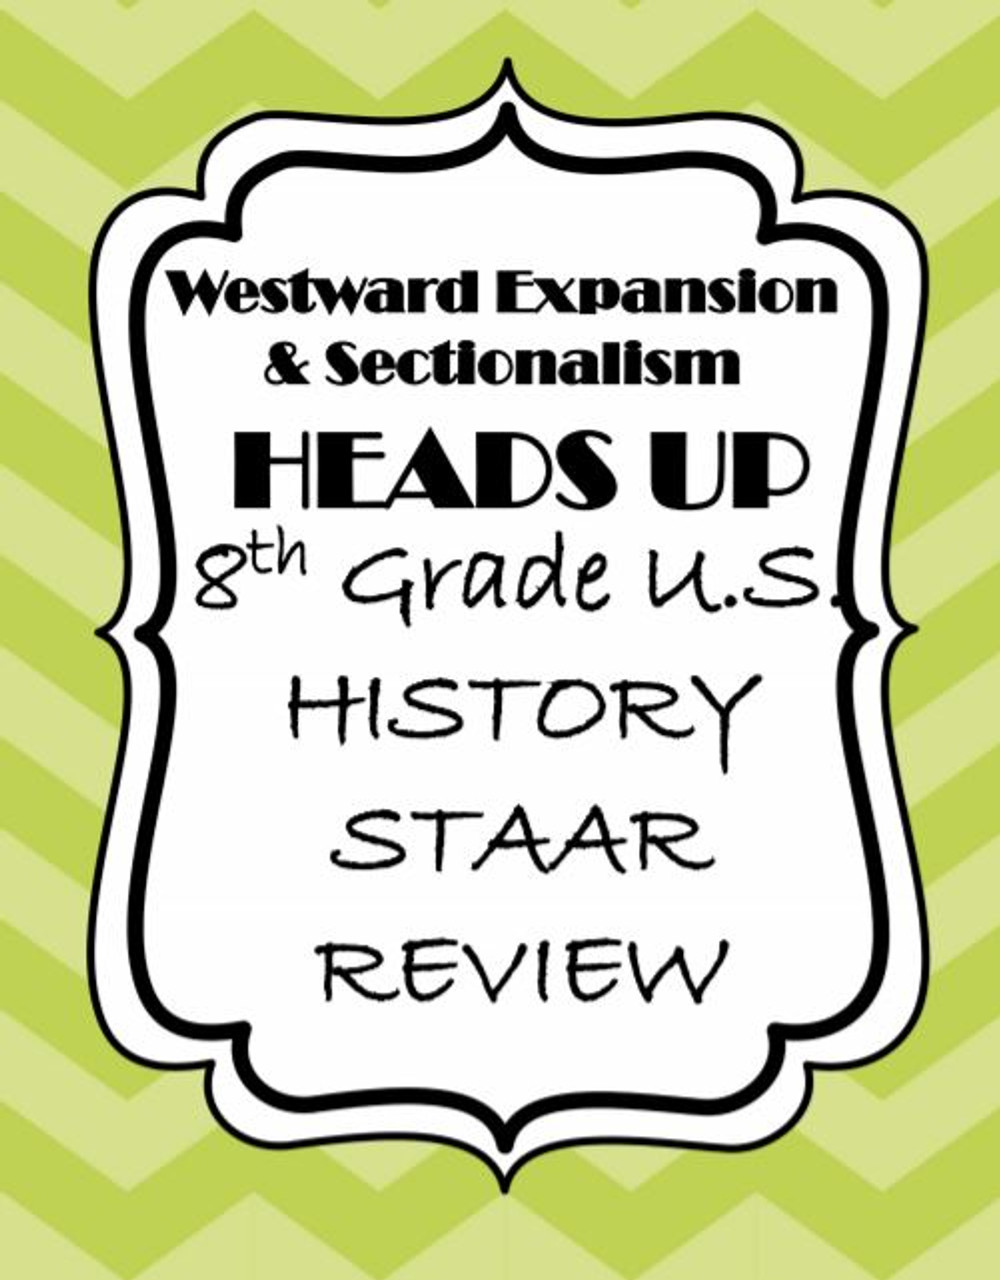 Westward Expansion and Sectionalism STAAR Review Game - Heads Up